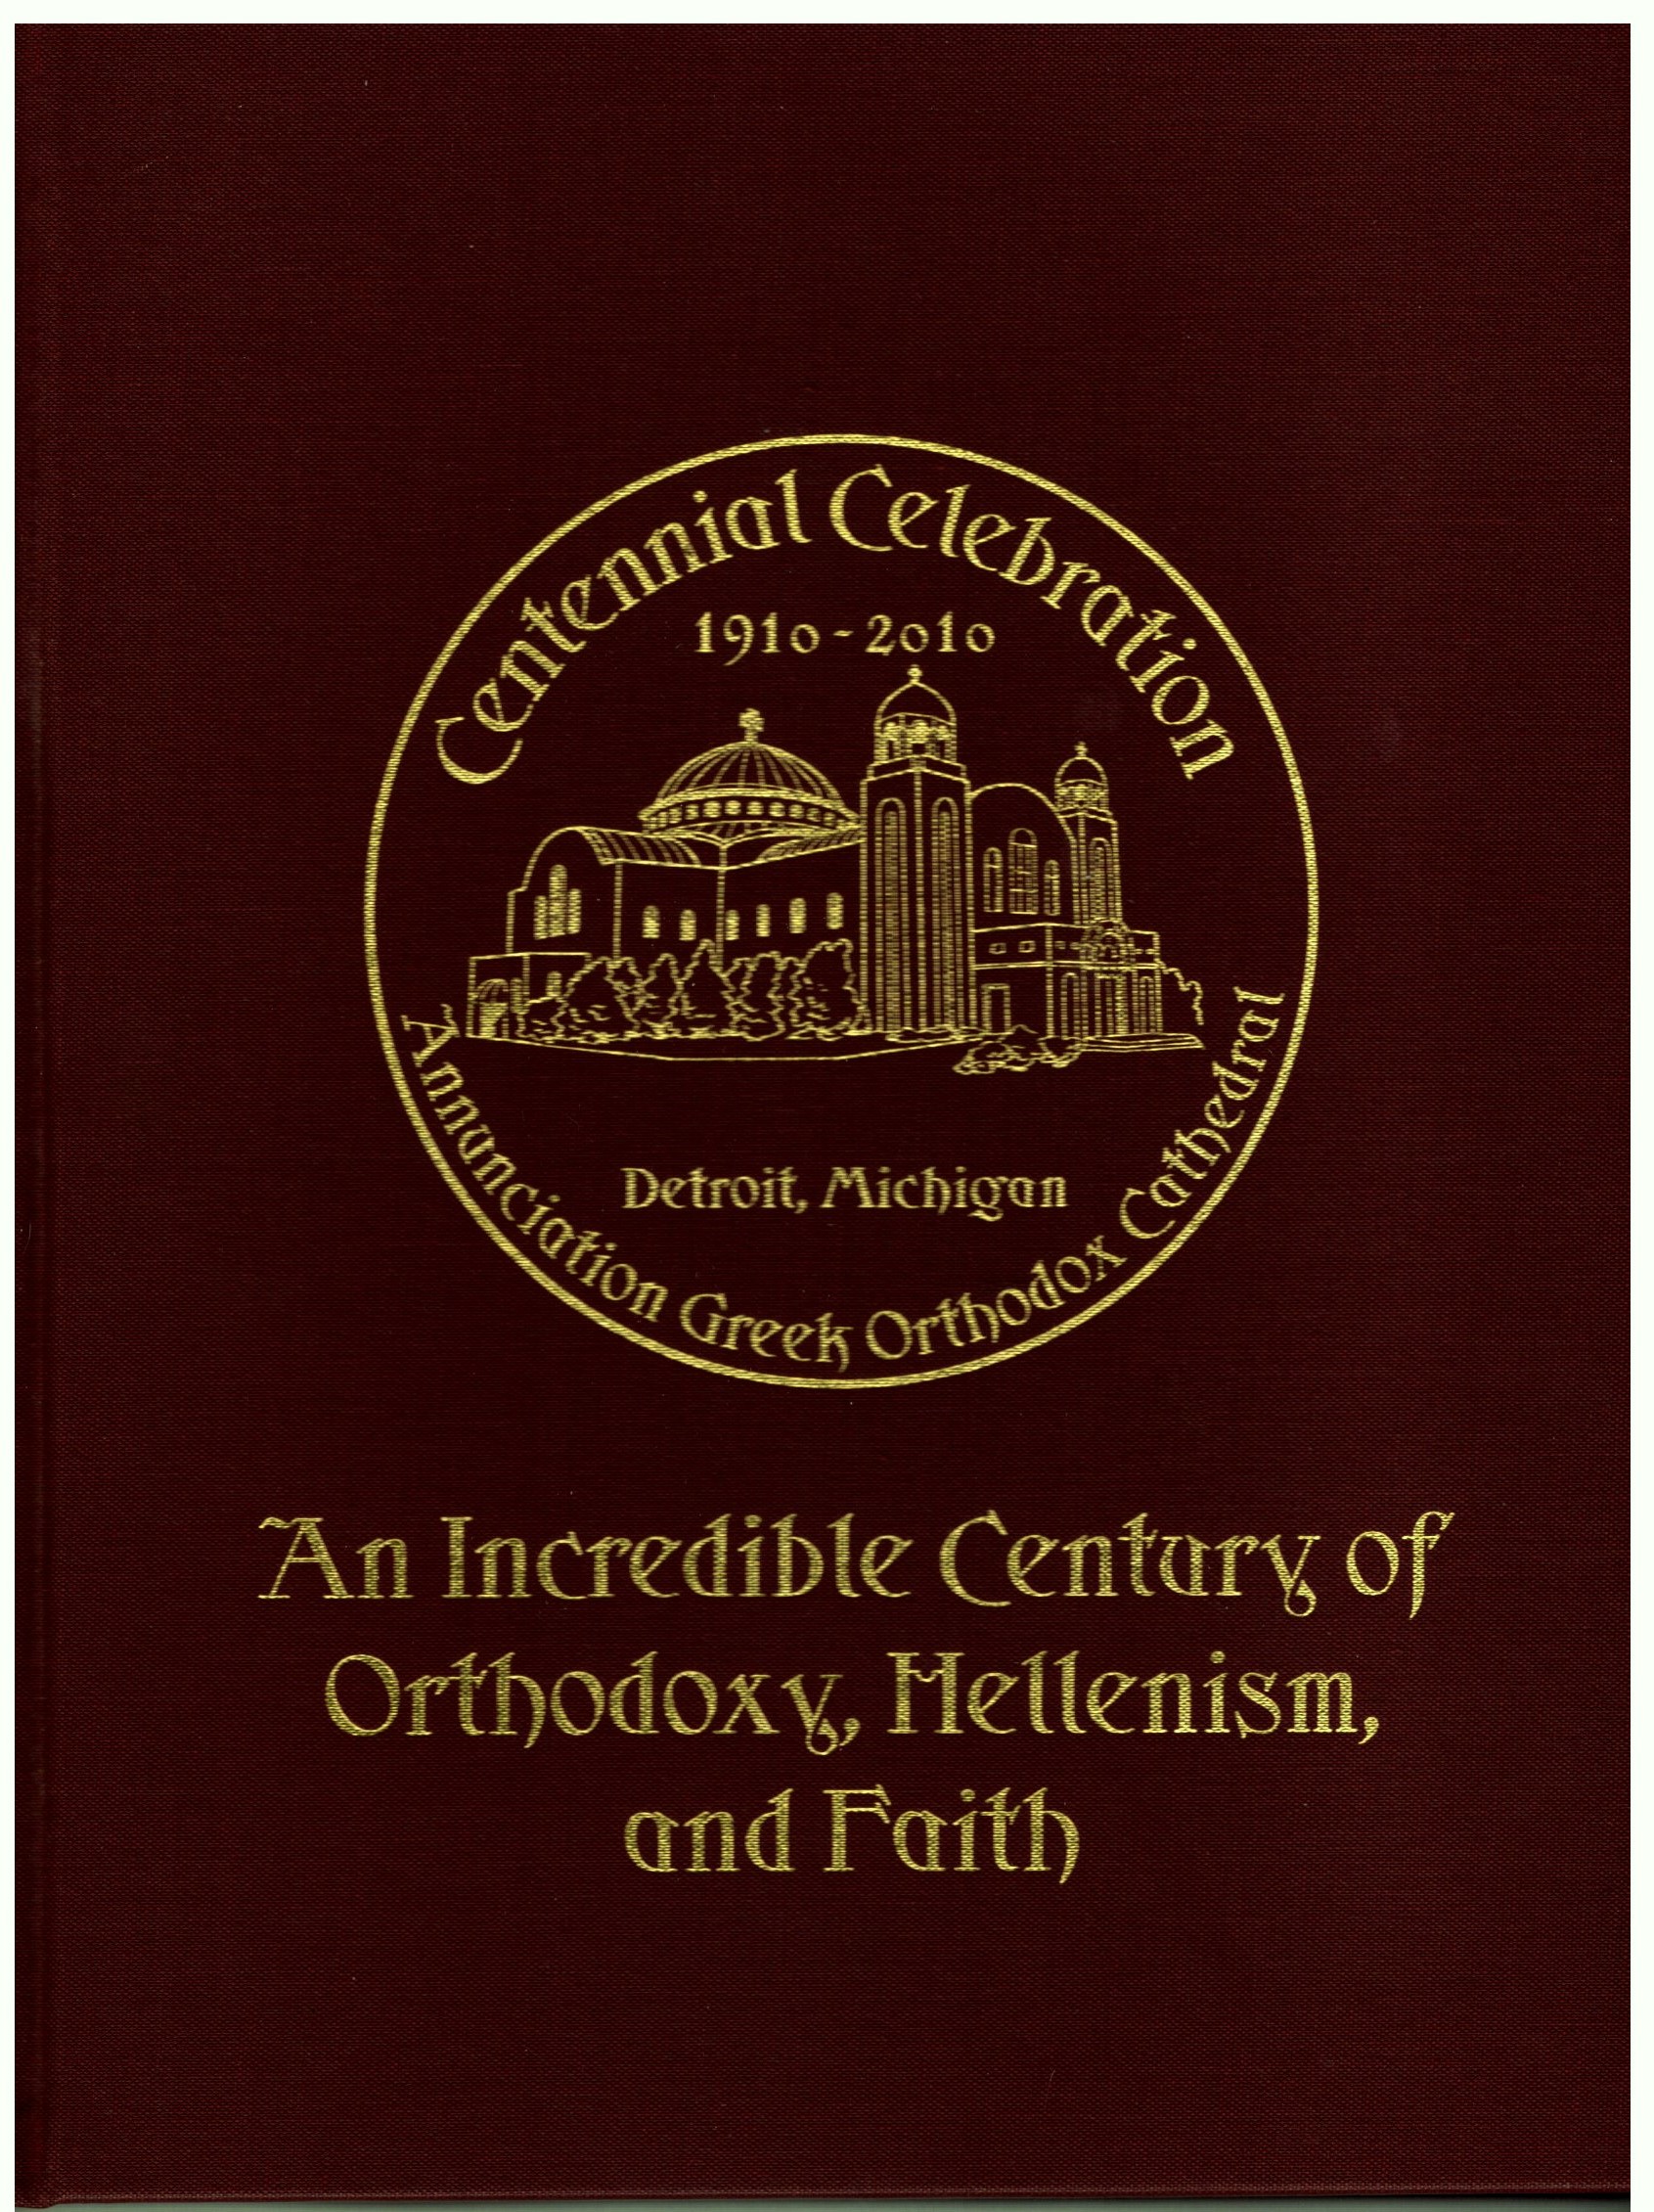 Image for Incredible Century of Orthodoxy, Hellenism, and Faith, an :  Centennial, Annunciation Greek Orthodox Cathedral, Detroit, Michigan, 1910-2010